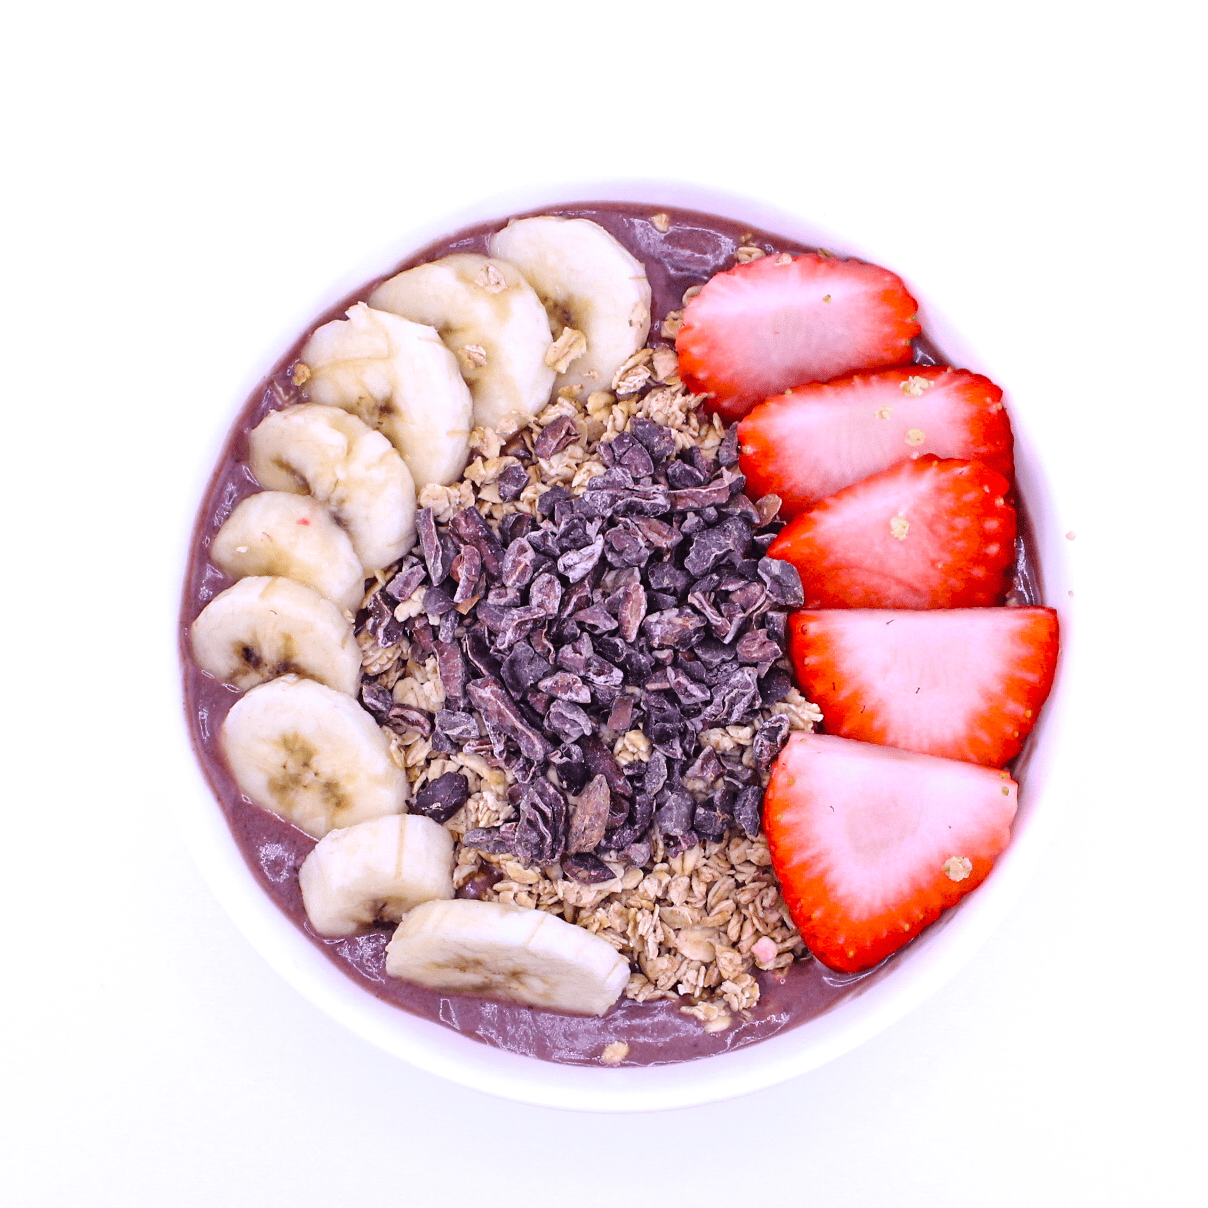 Chocolate PB&B - Acai, almond milk, banana, peanut butter, chocolate syrup, strawberries.Topped with granola, strawberry slices, banana slices and cacao nibs